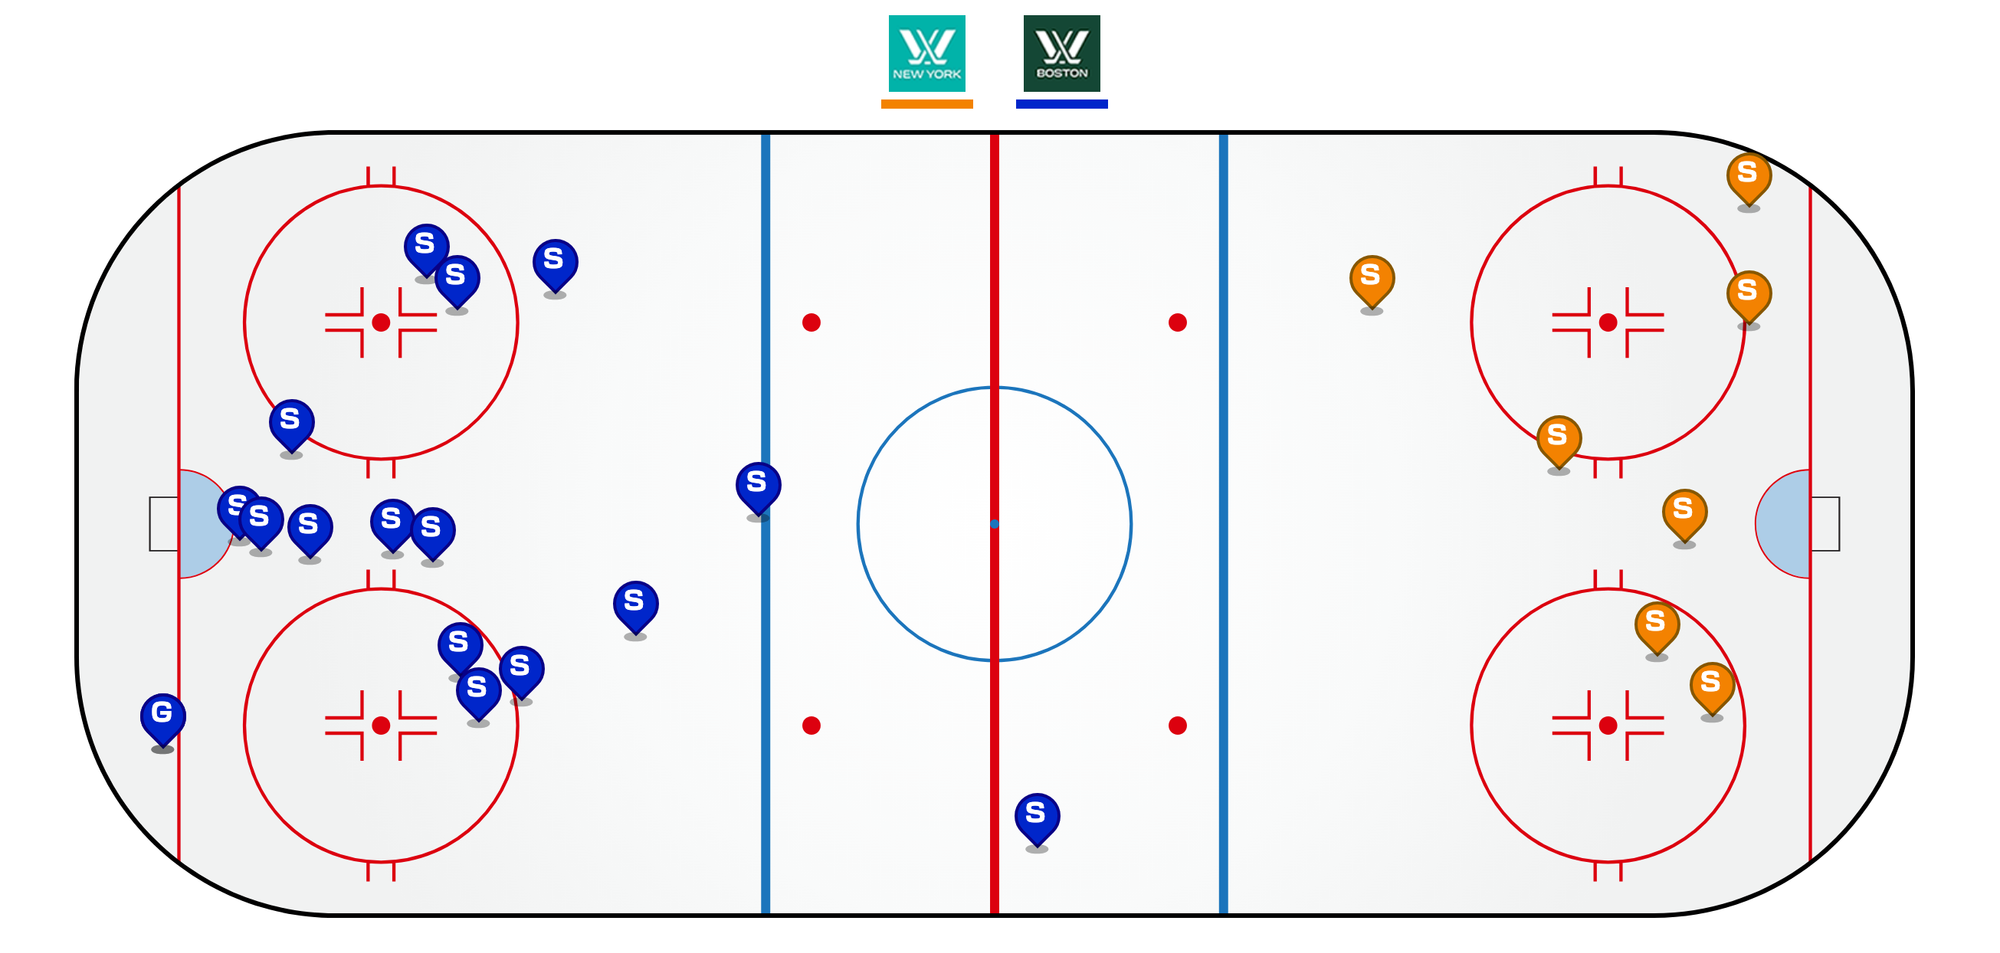 A graphic of an ice rink, with blue dots representing Boston's shots and orange dots representing New York. Boston has 16 shots, including 6 from the slot, while New York only has seven shots and they are more spread out.